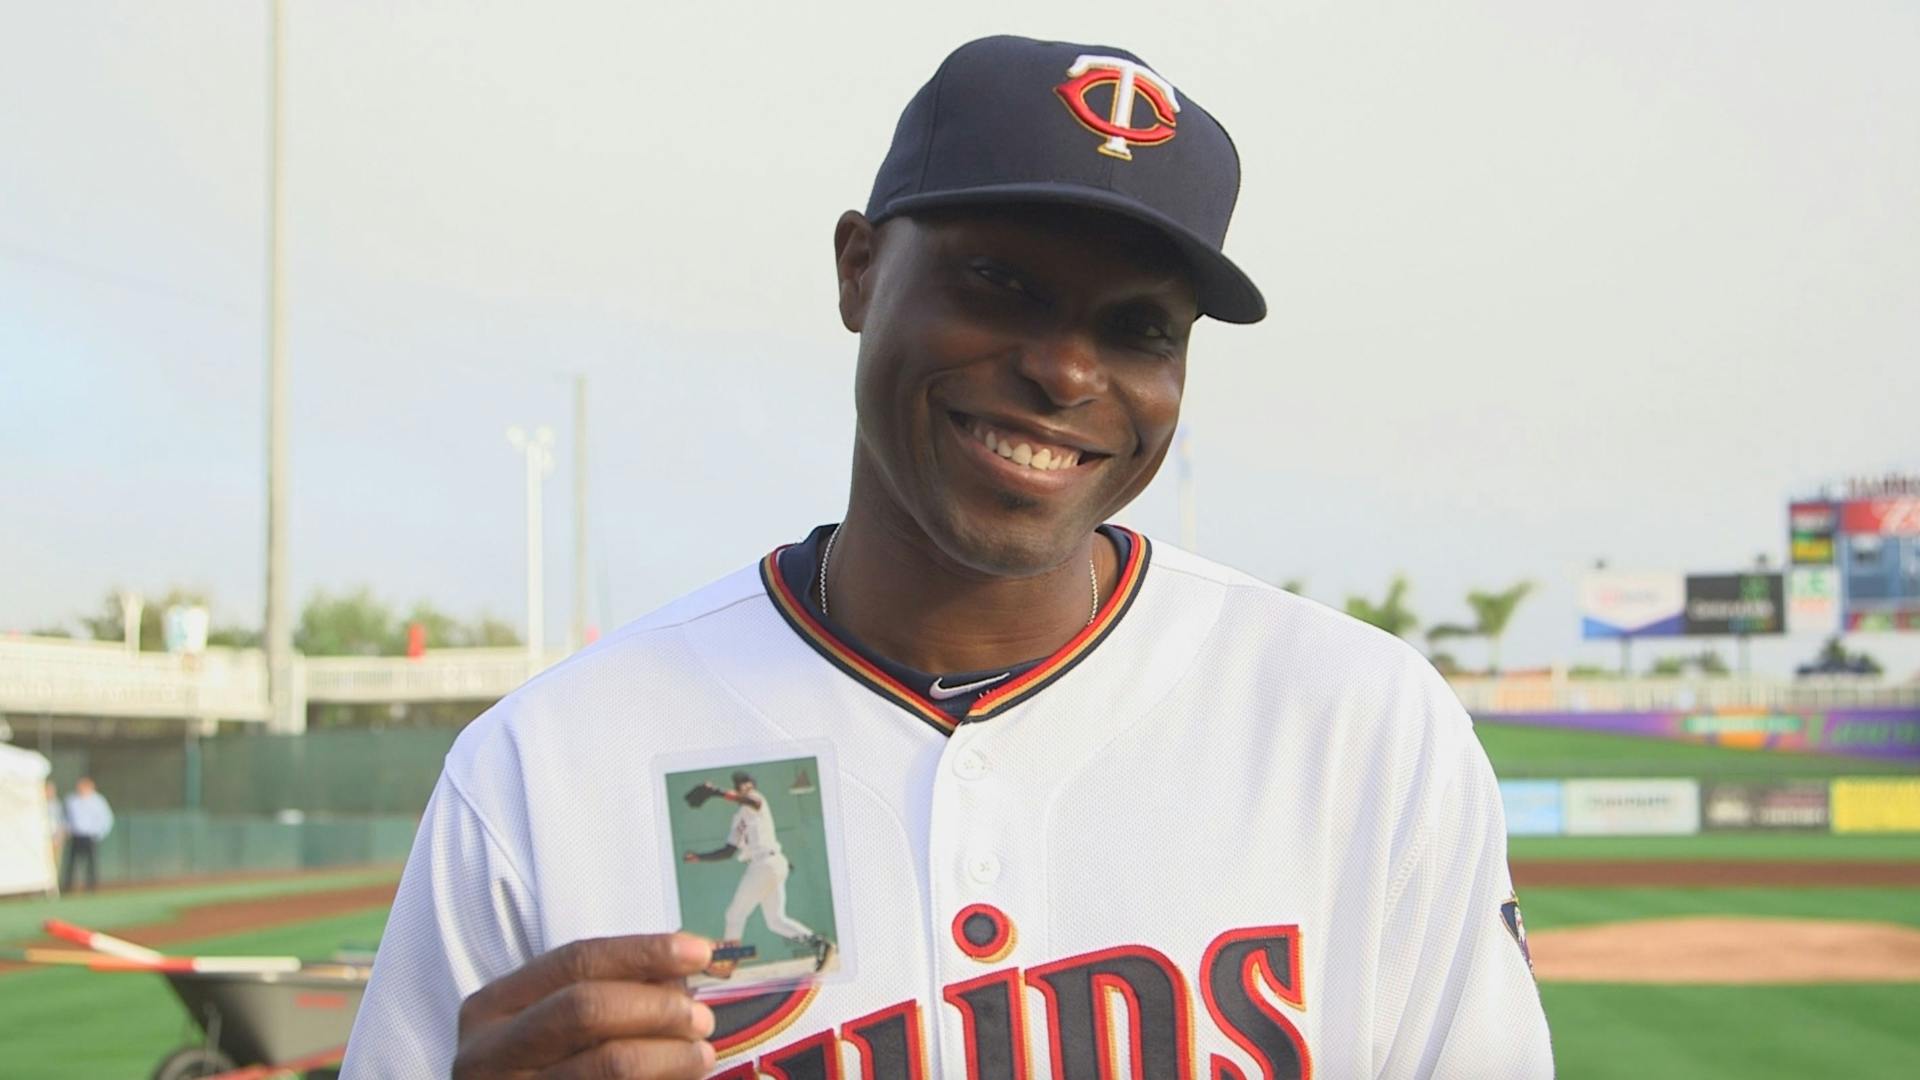 We showed Twins players and coaches their rookie cards and asked what they'd say to the kid on the card. Some answers might surprise (and inspire) you.